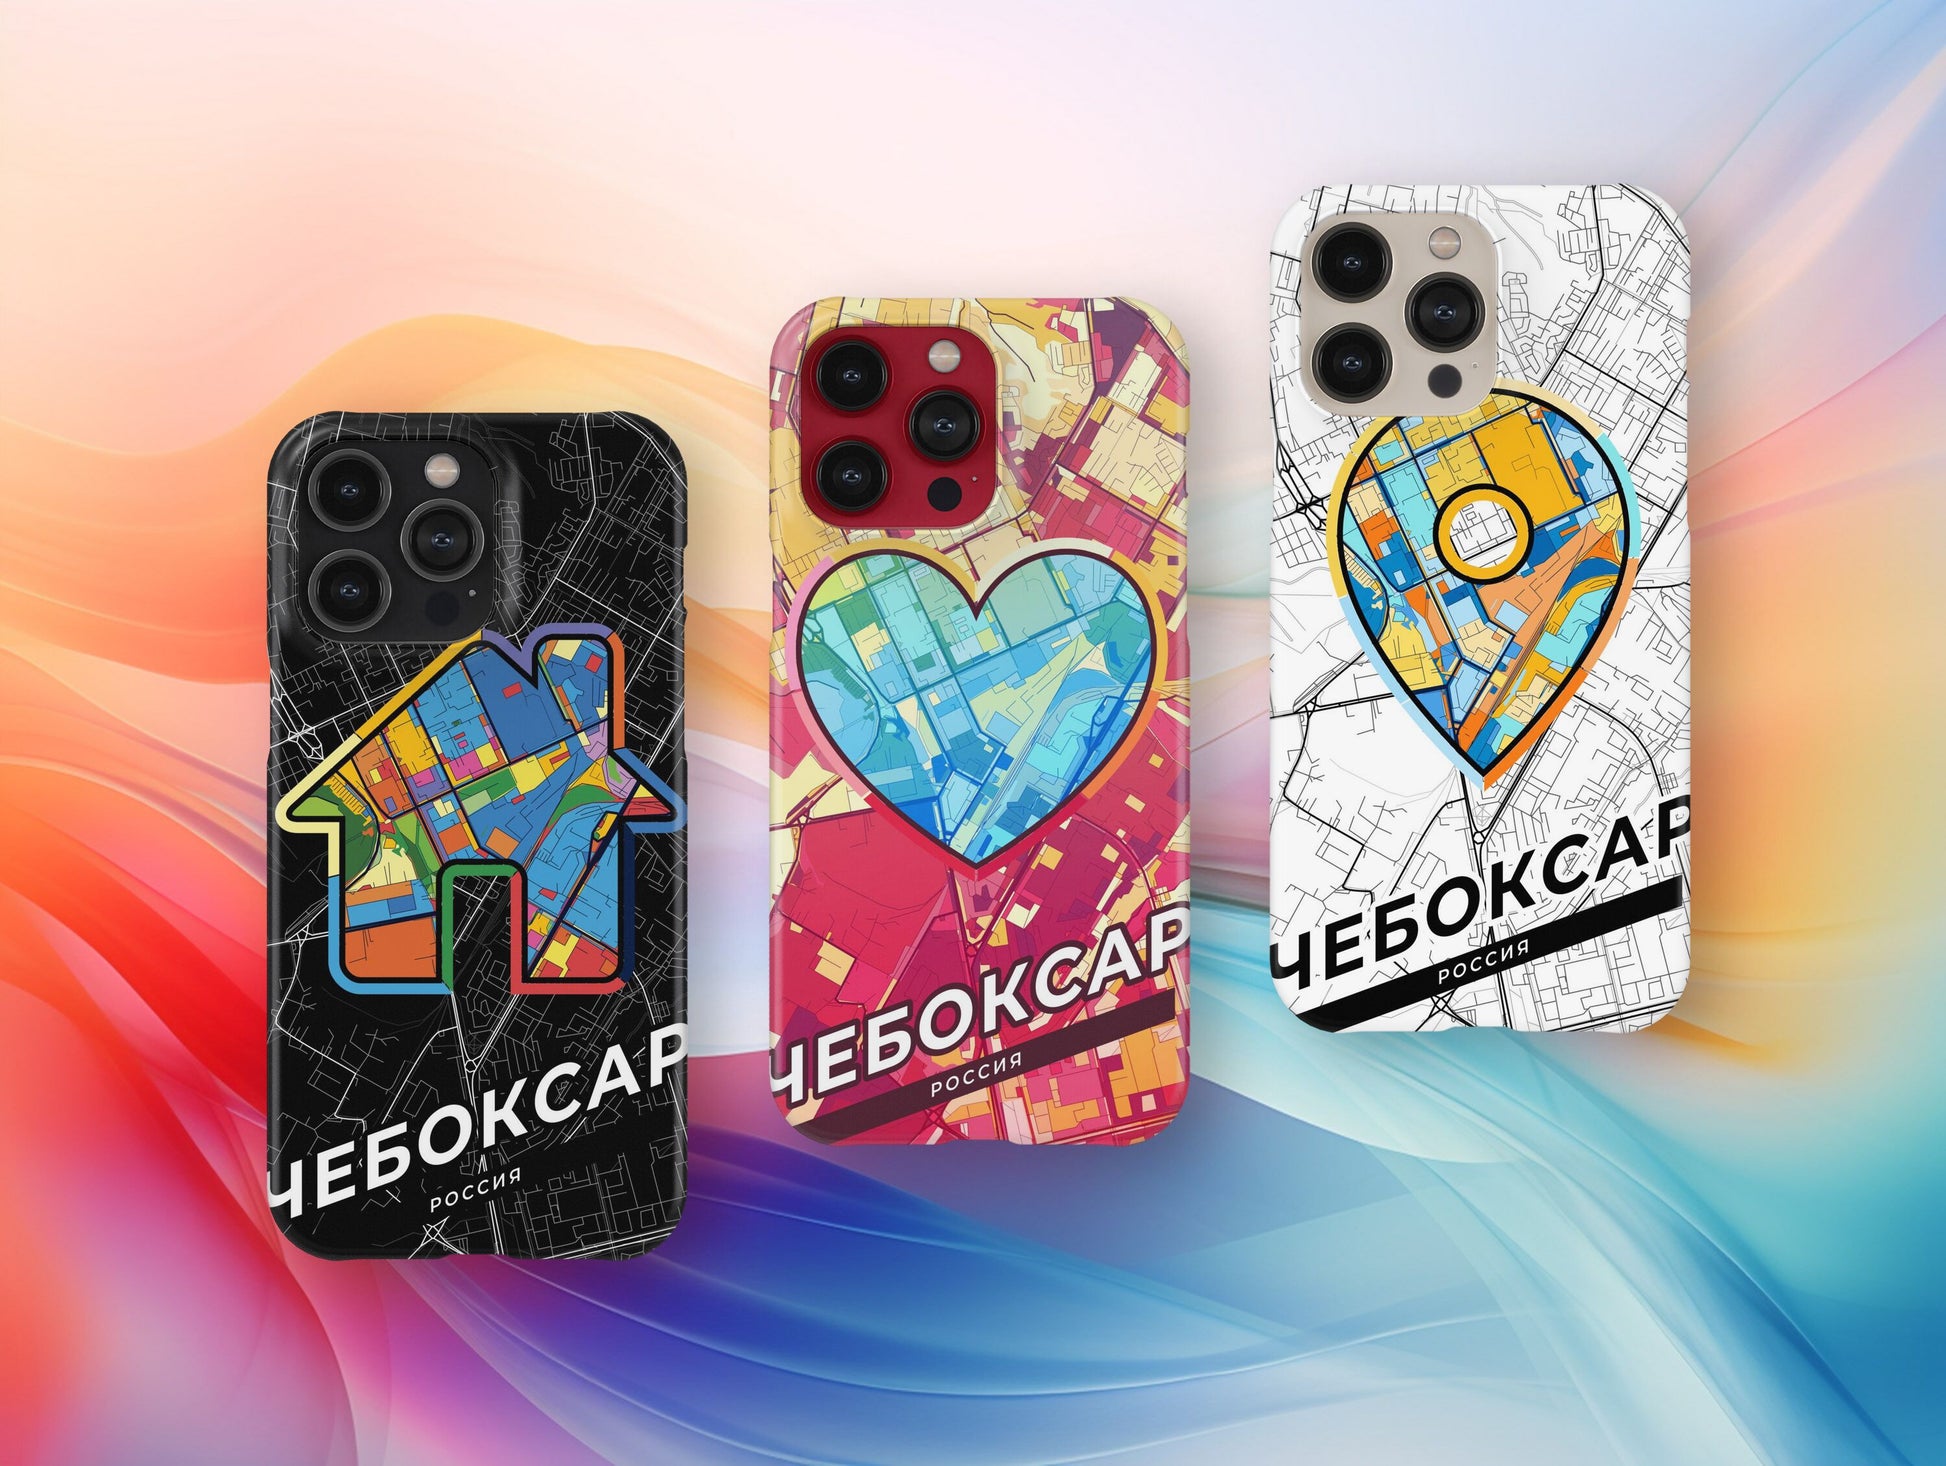 Cheboksary Russia slim phone case with colorful icon. Birthday, wedding or housewarming gift. Couple match cases.